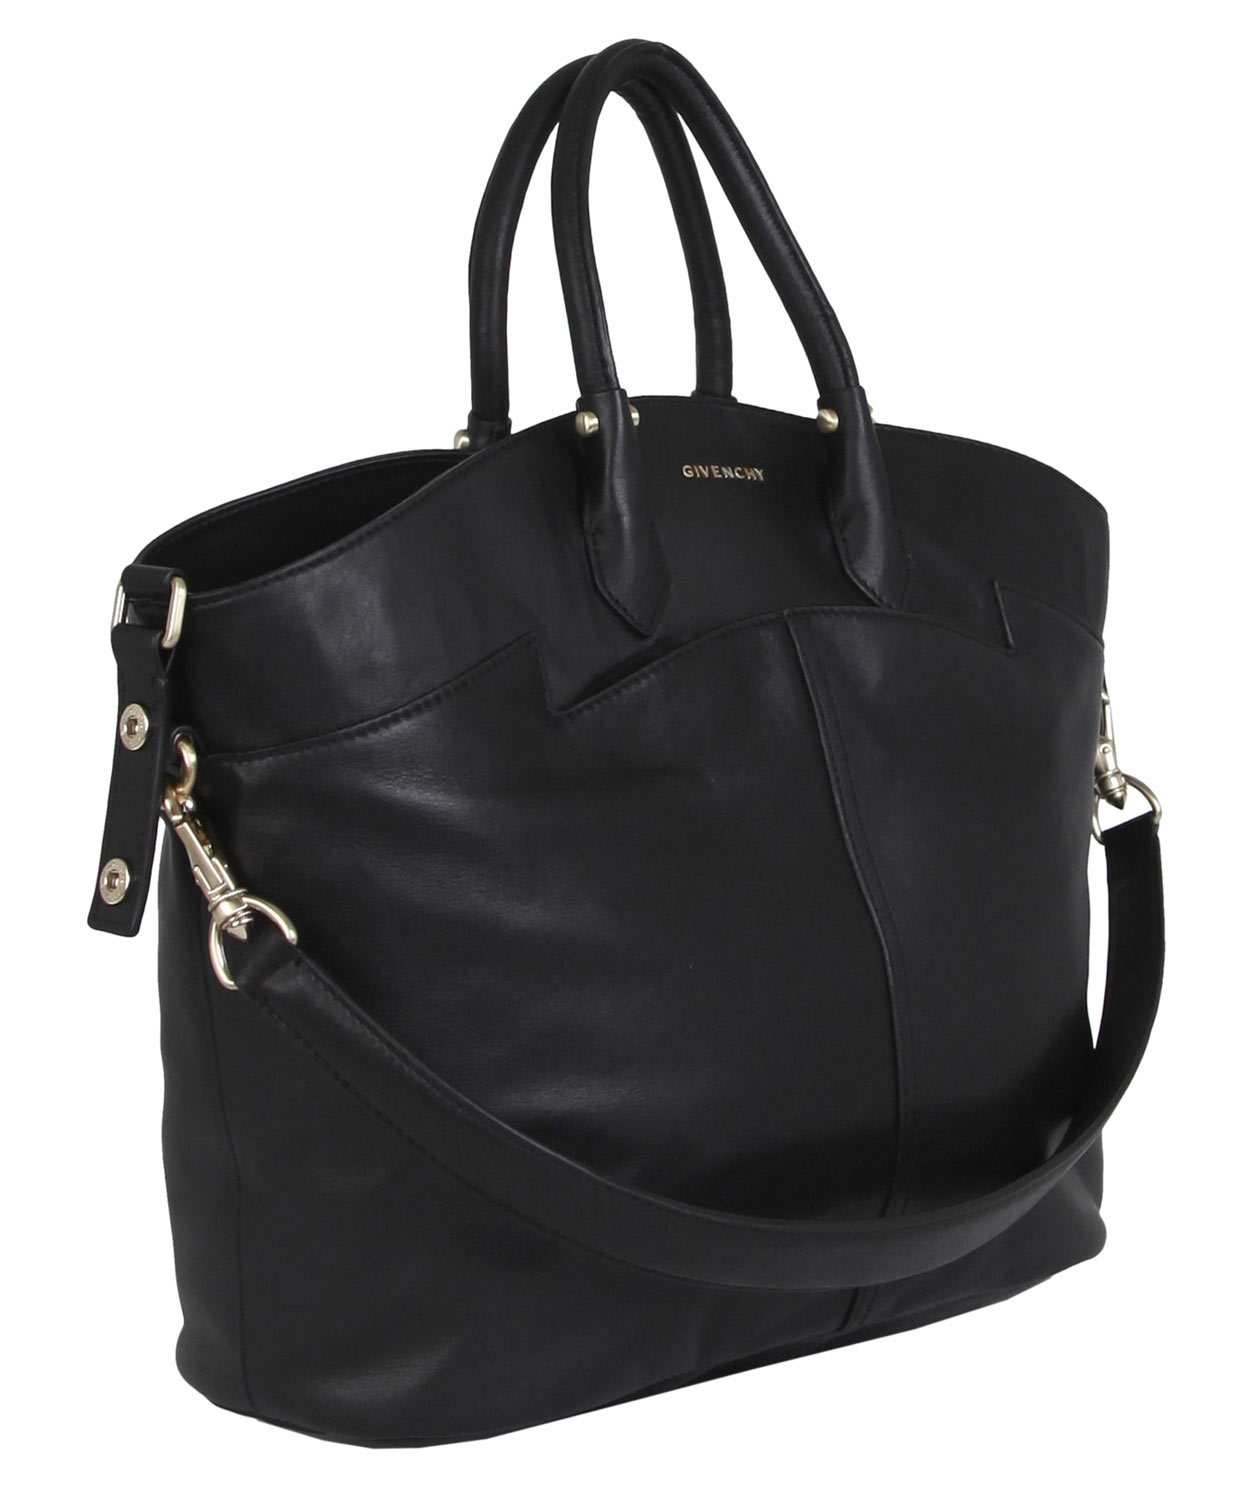 Givenchy Large Black Leather Tote Bag in Black | Lyst